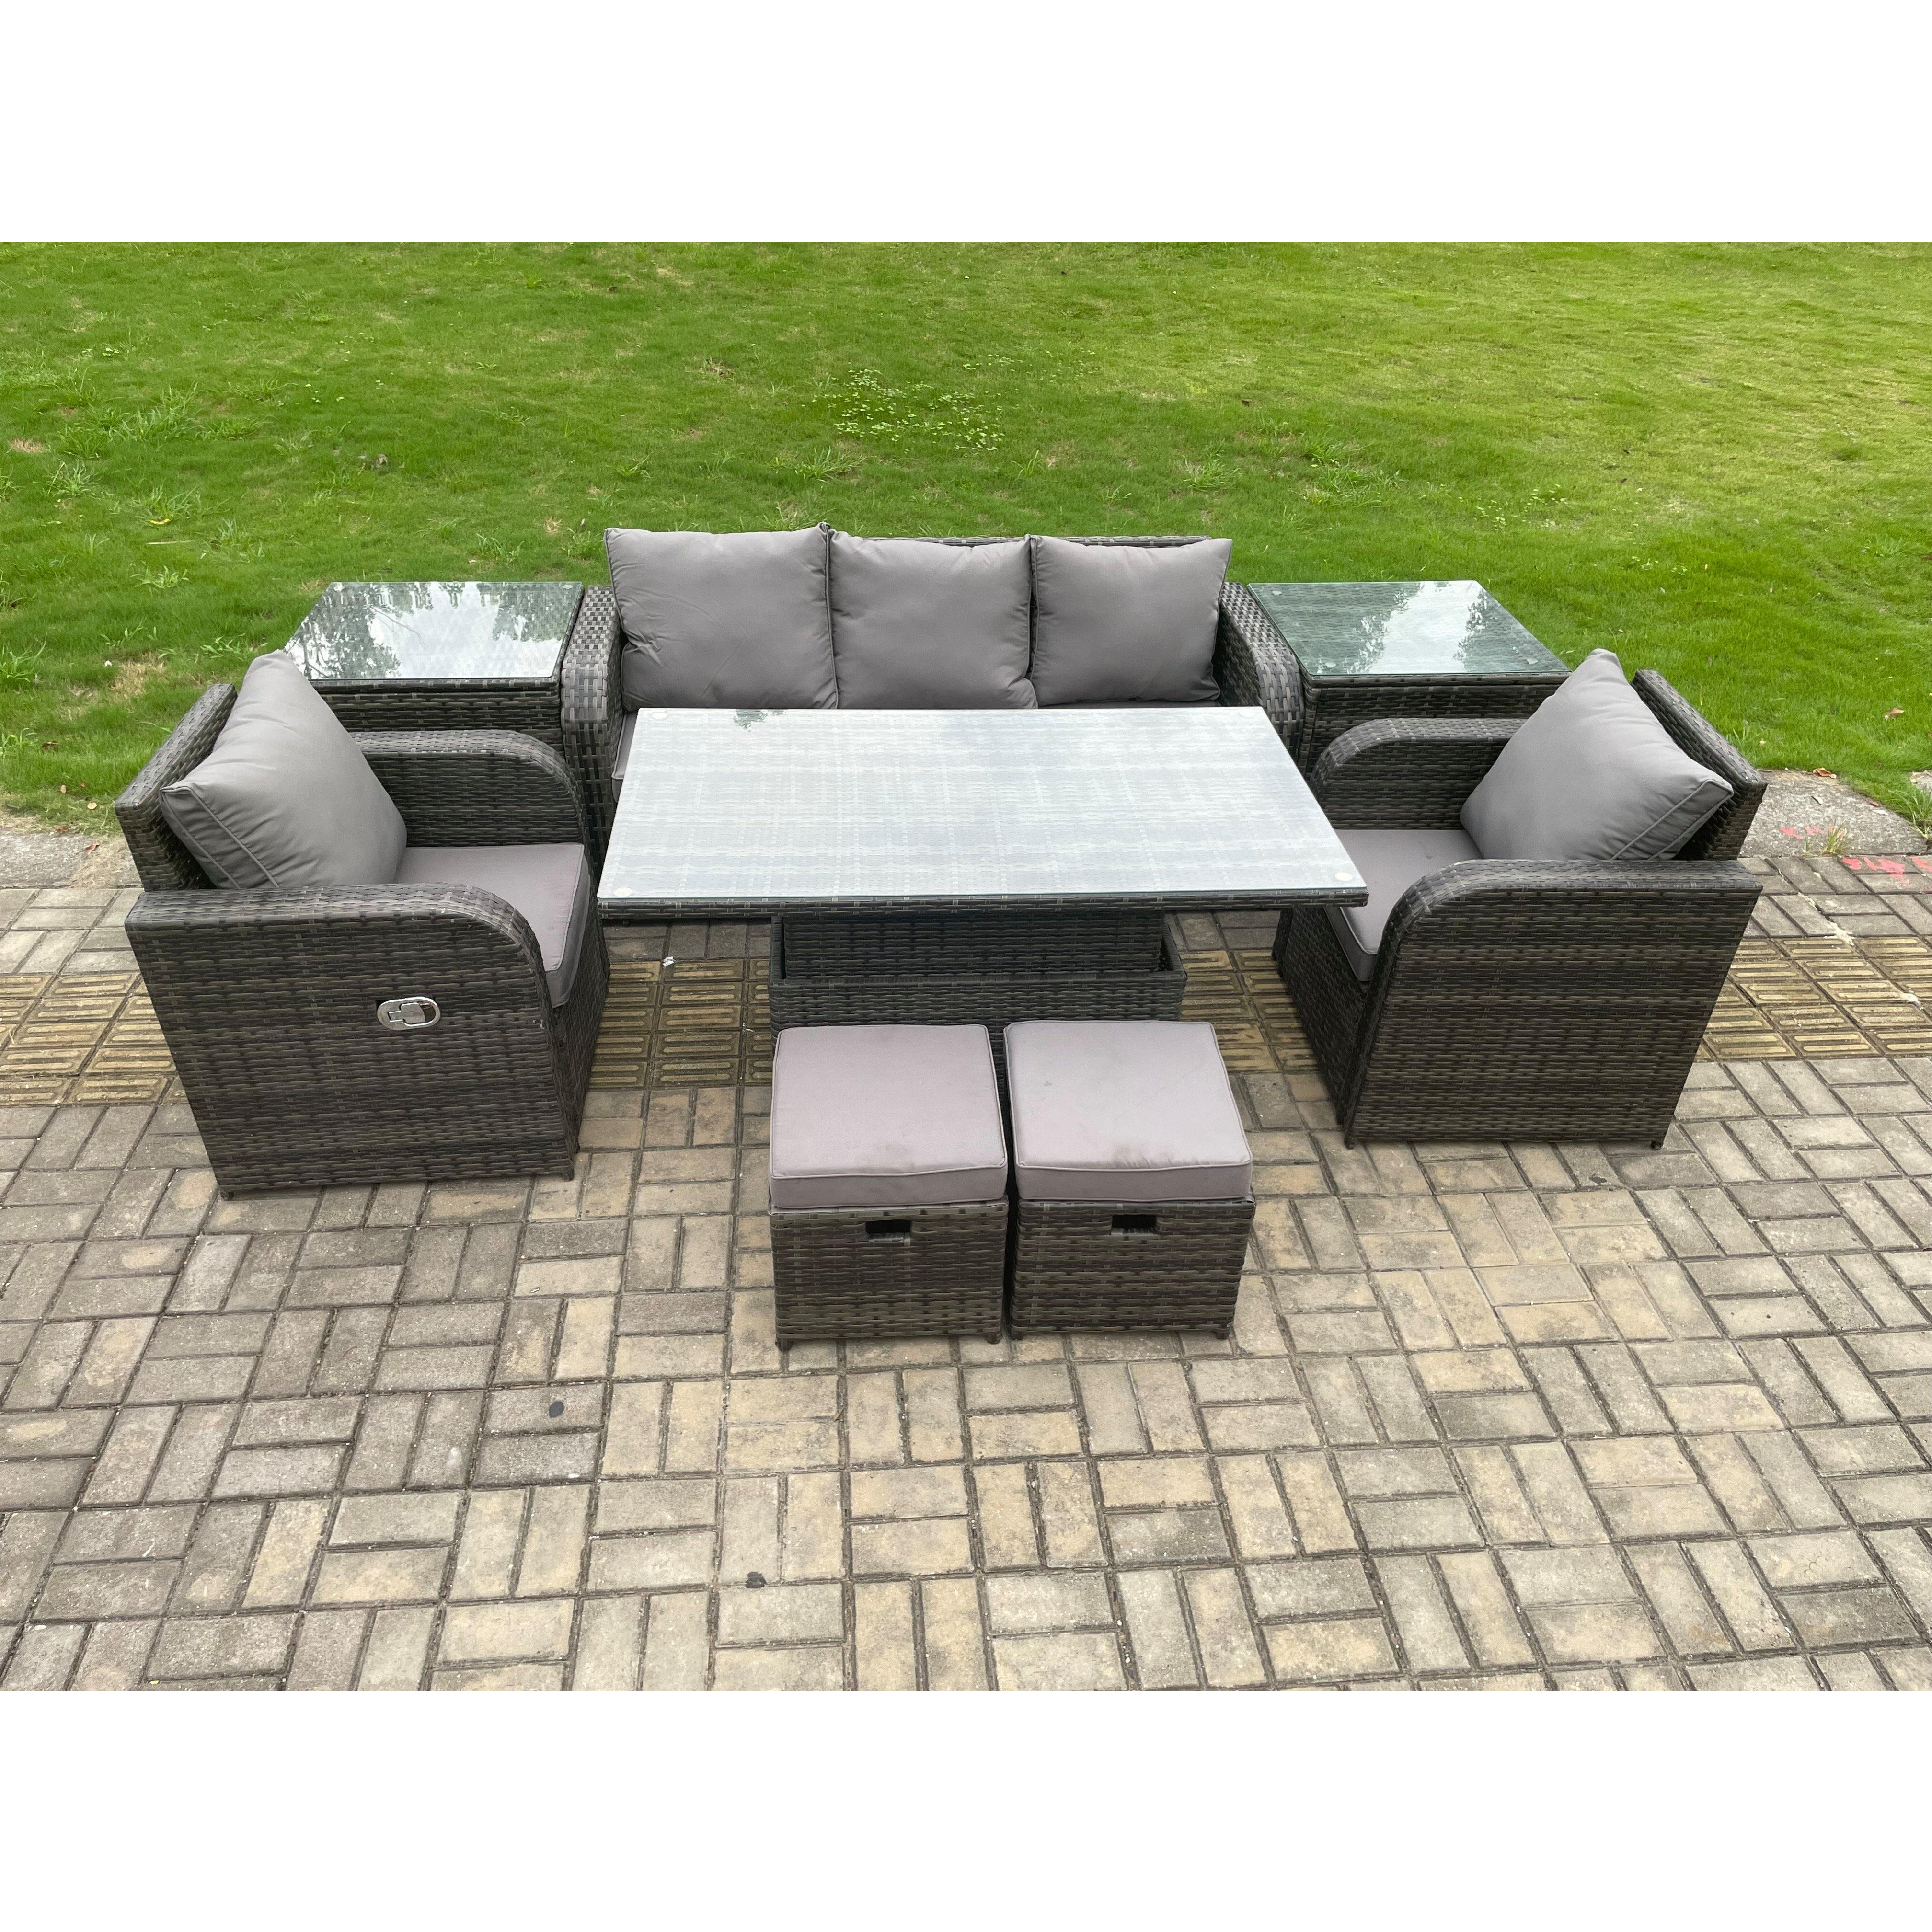 Outdoor Rattan Furniture Garden Dining Sets Adjustable Rising lifting Table Sofa Set With Chair 2 Small Footstools - image 1